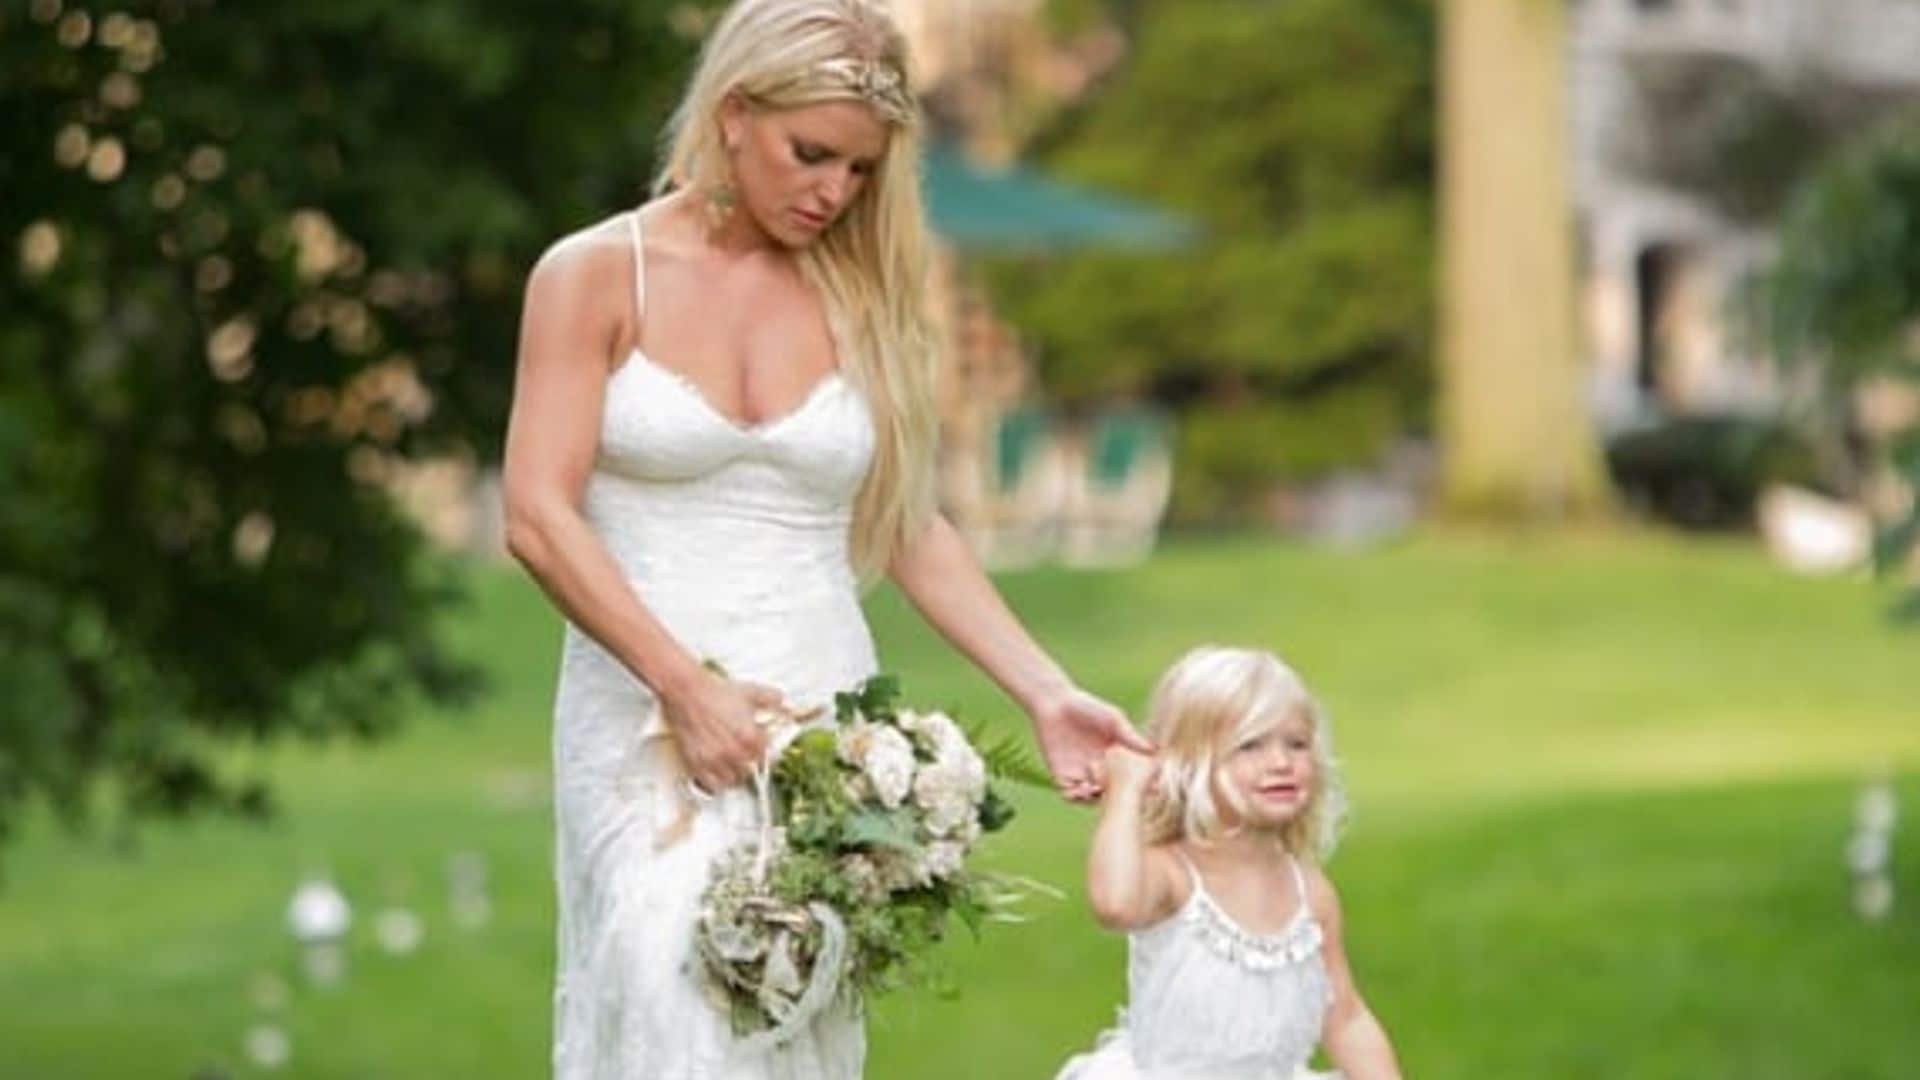 Jessica Simpson shares sweet snapshot from sister Ashlee's wedding